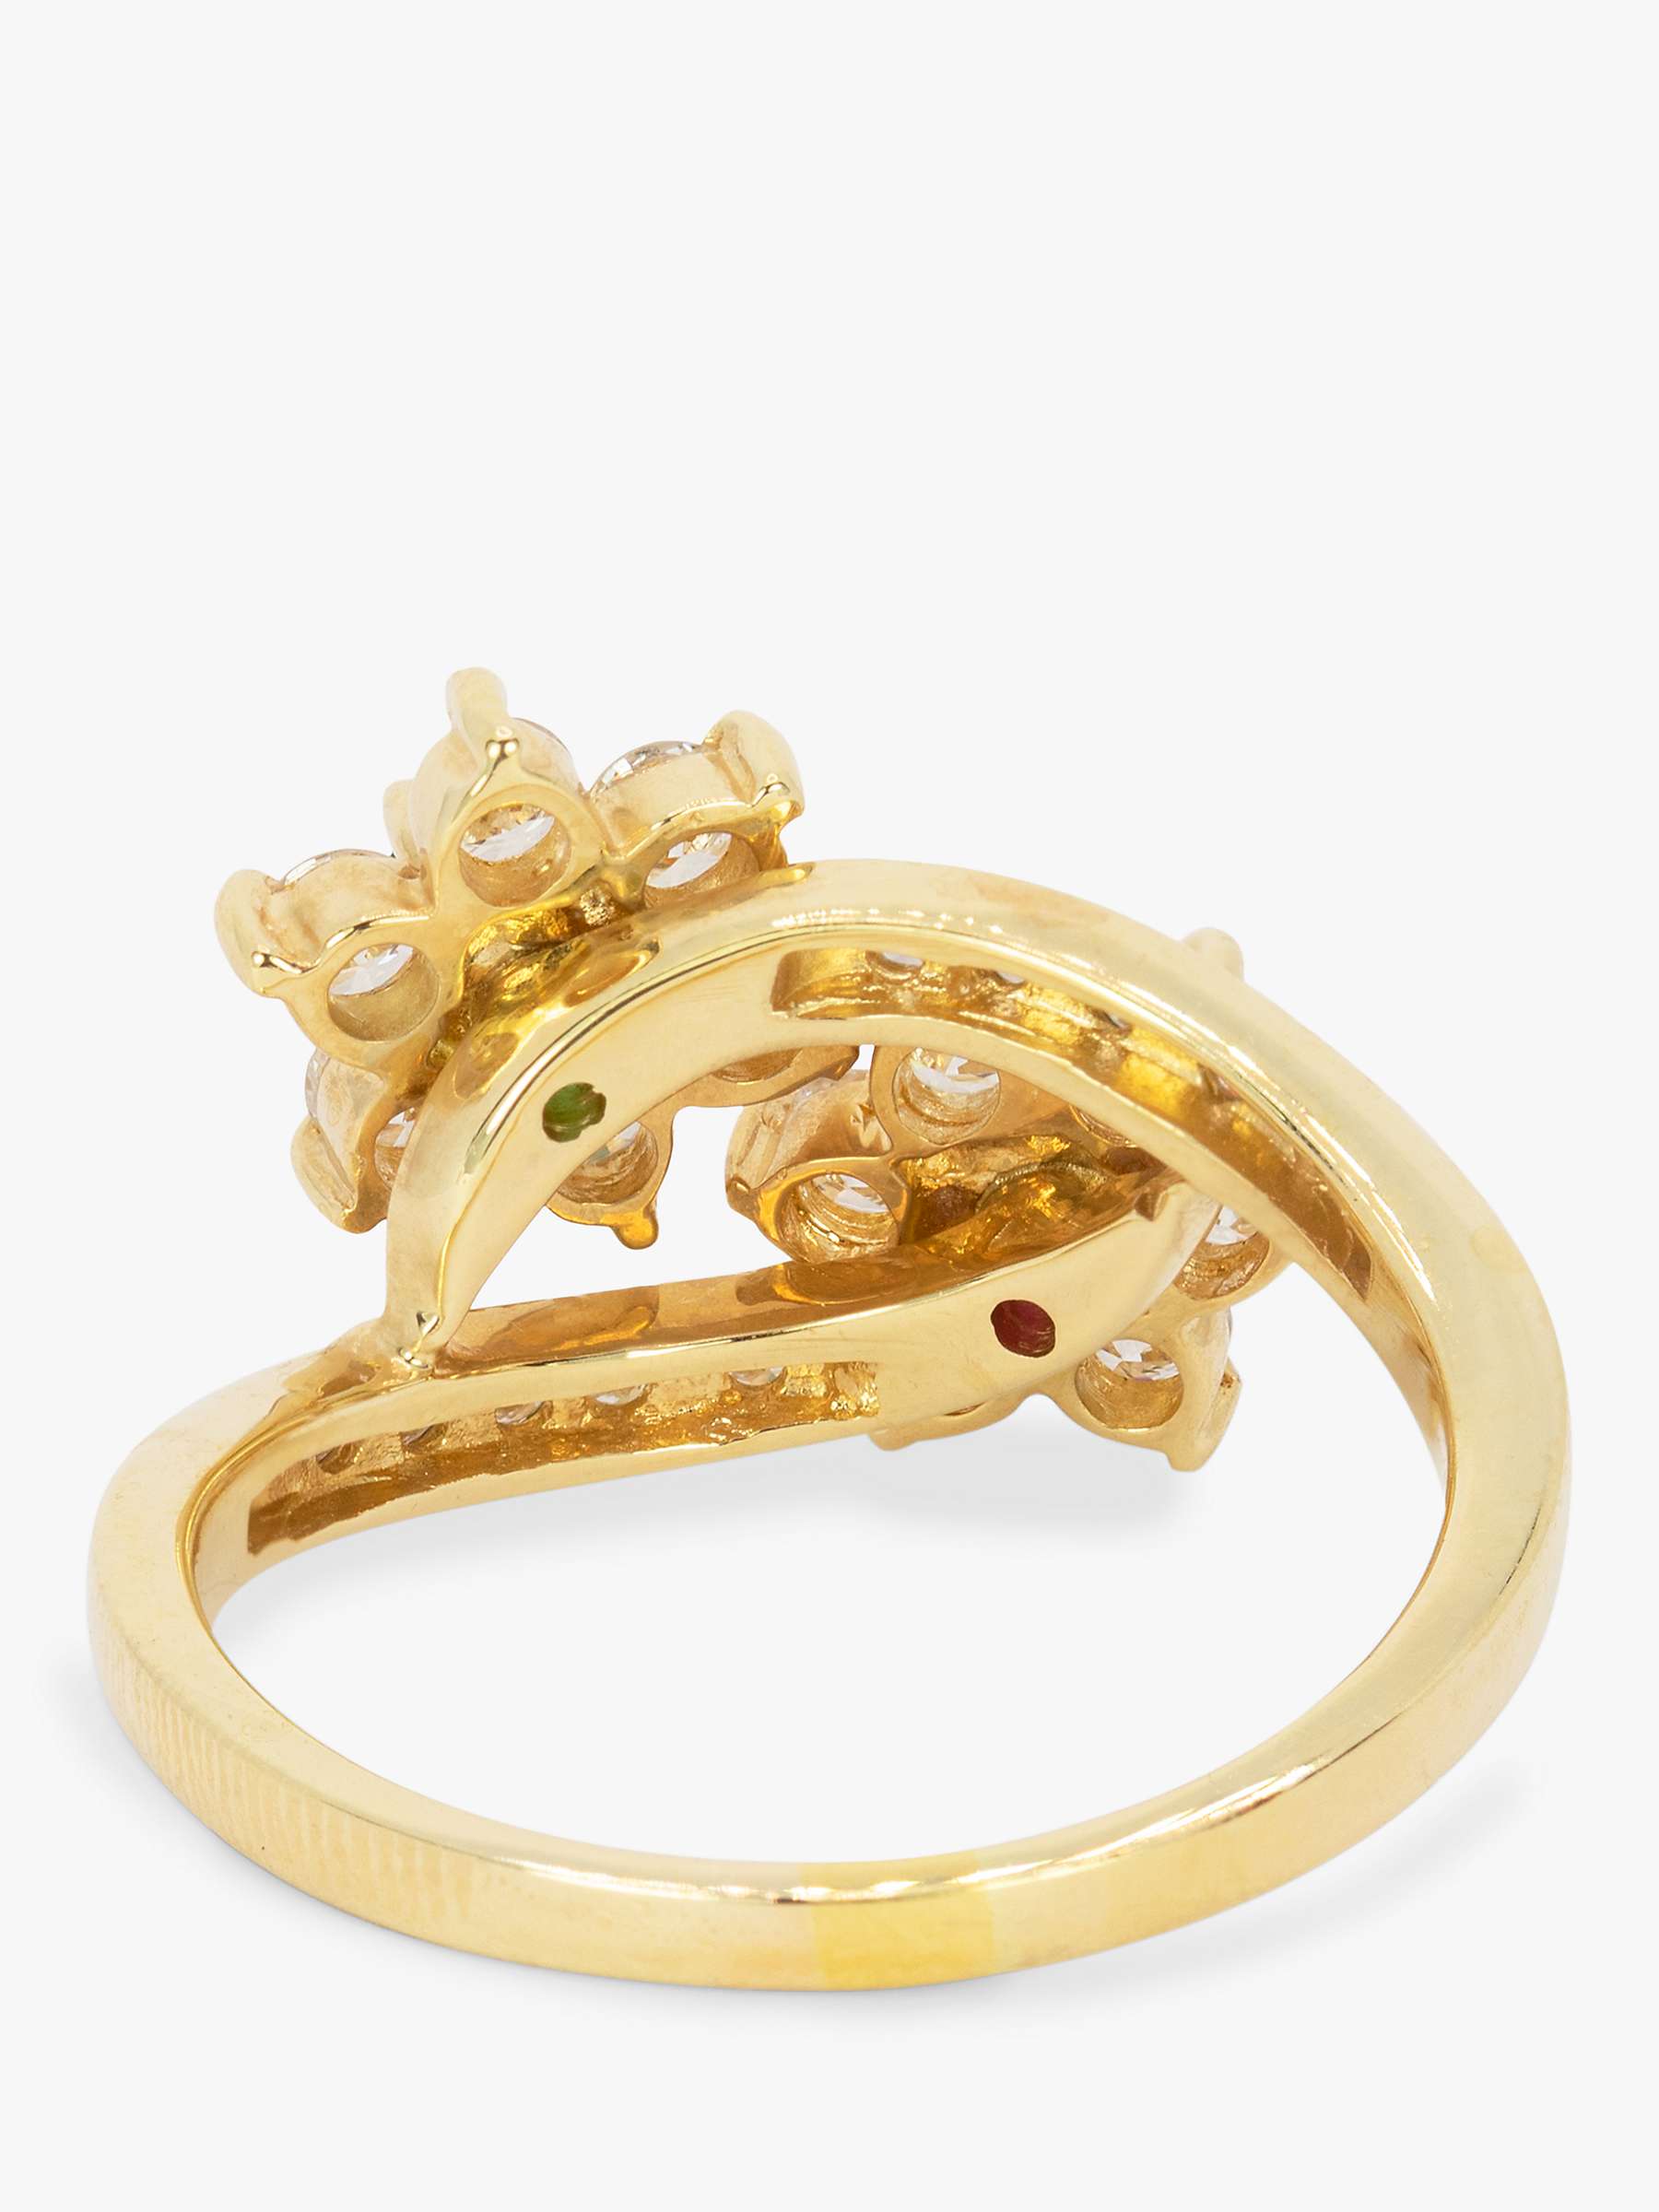 Buy Kojis Second Hand 14ct Yellow Gold Emerald, Ruby & Diamond Flower Cross Over Cocktail Ring Online at johnlewis.com